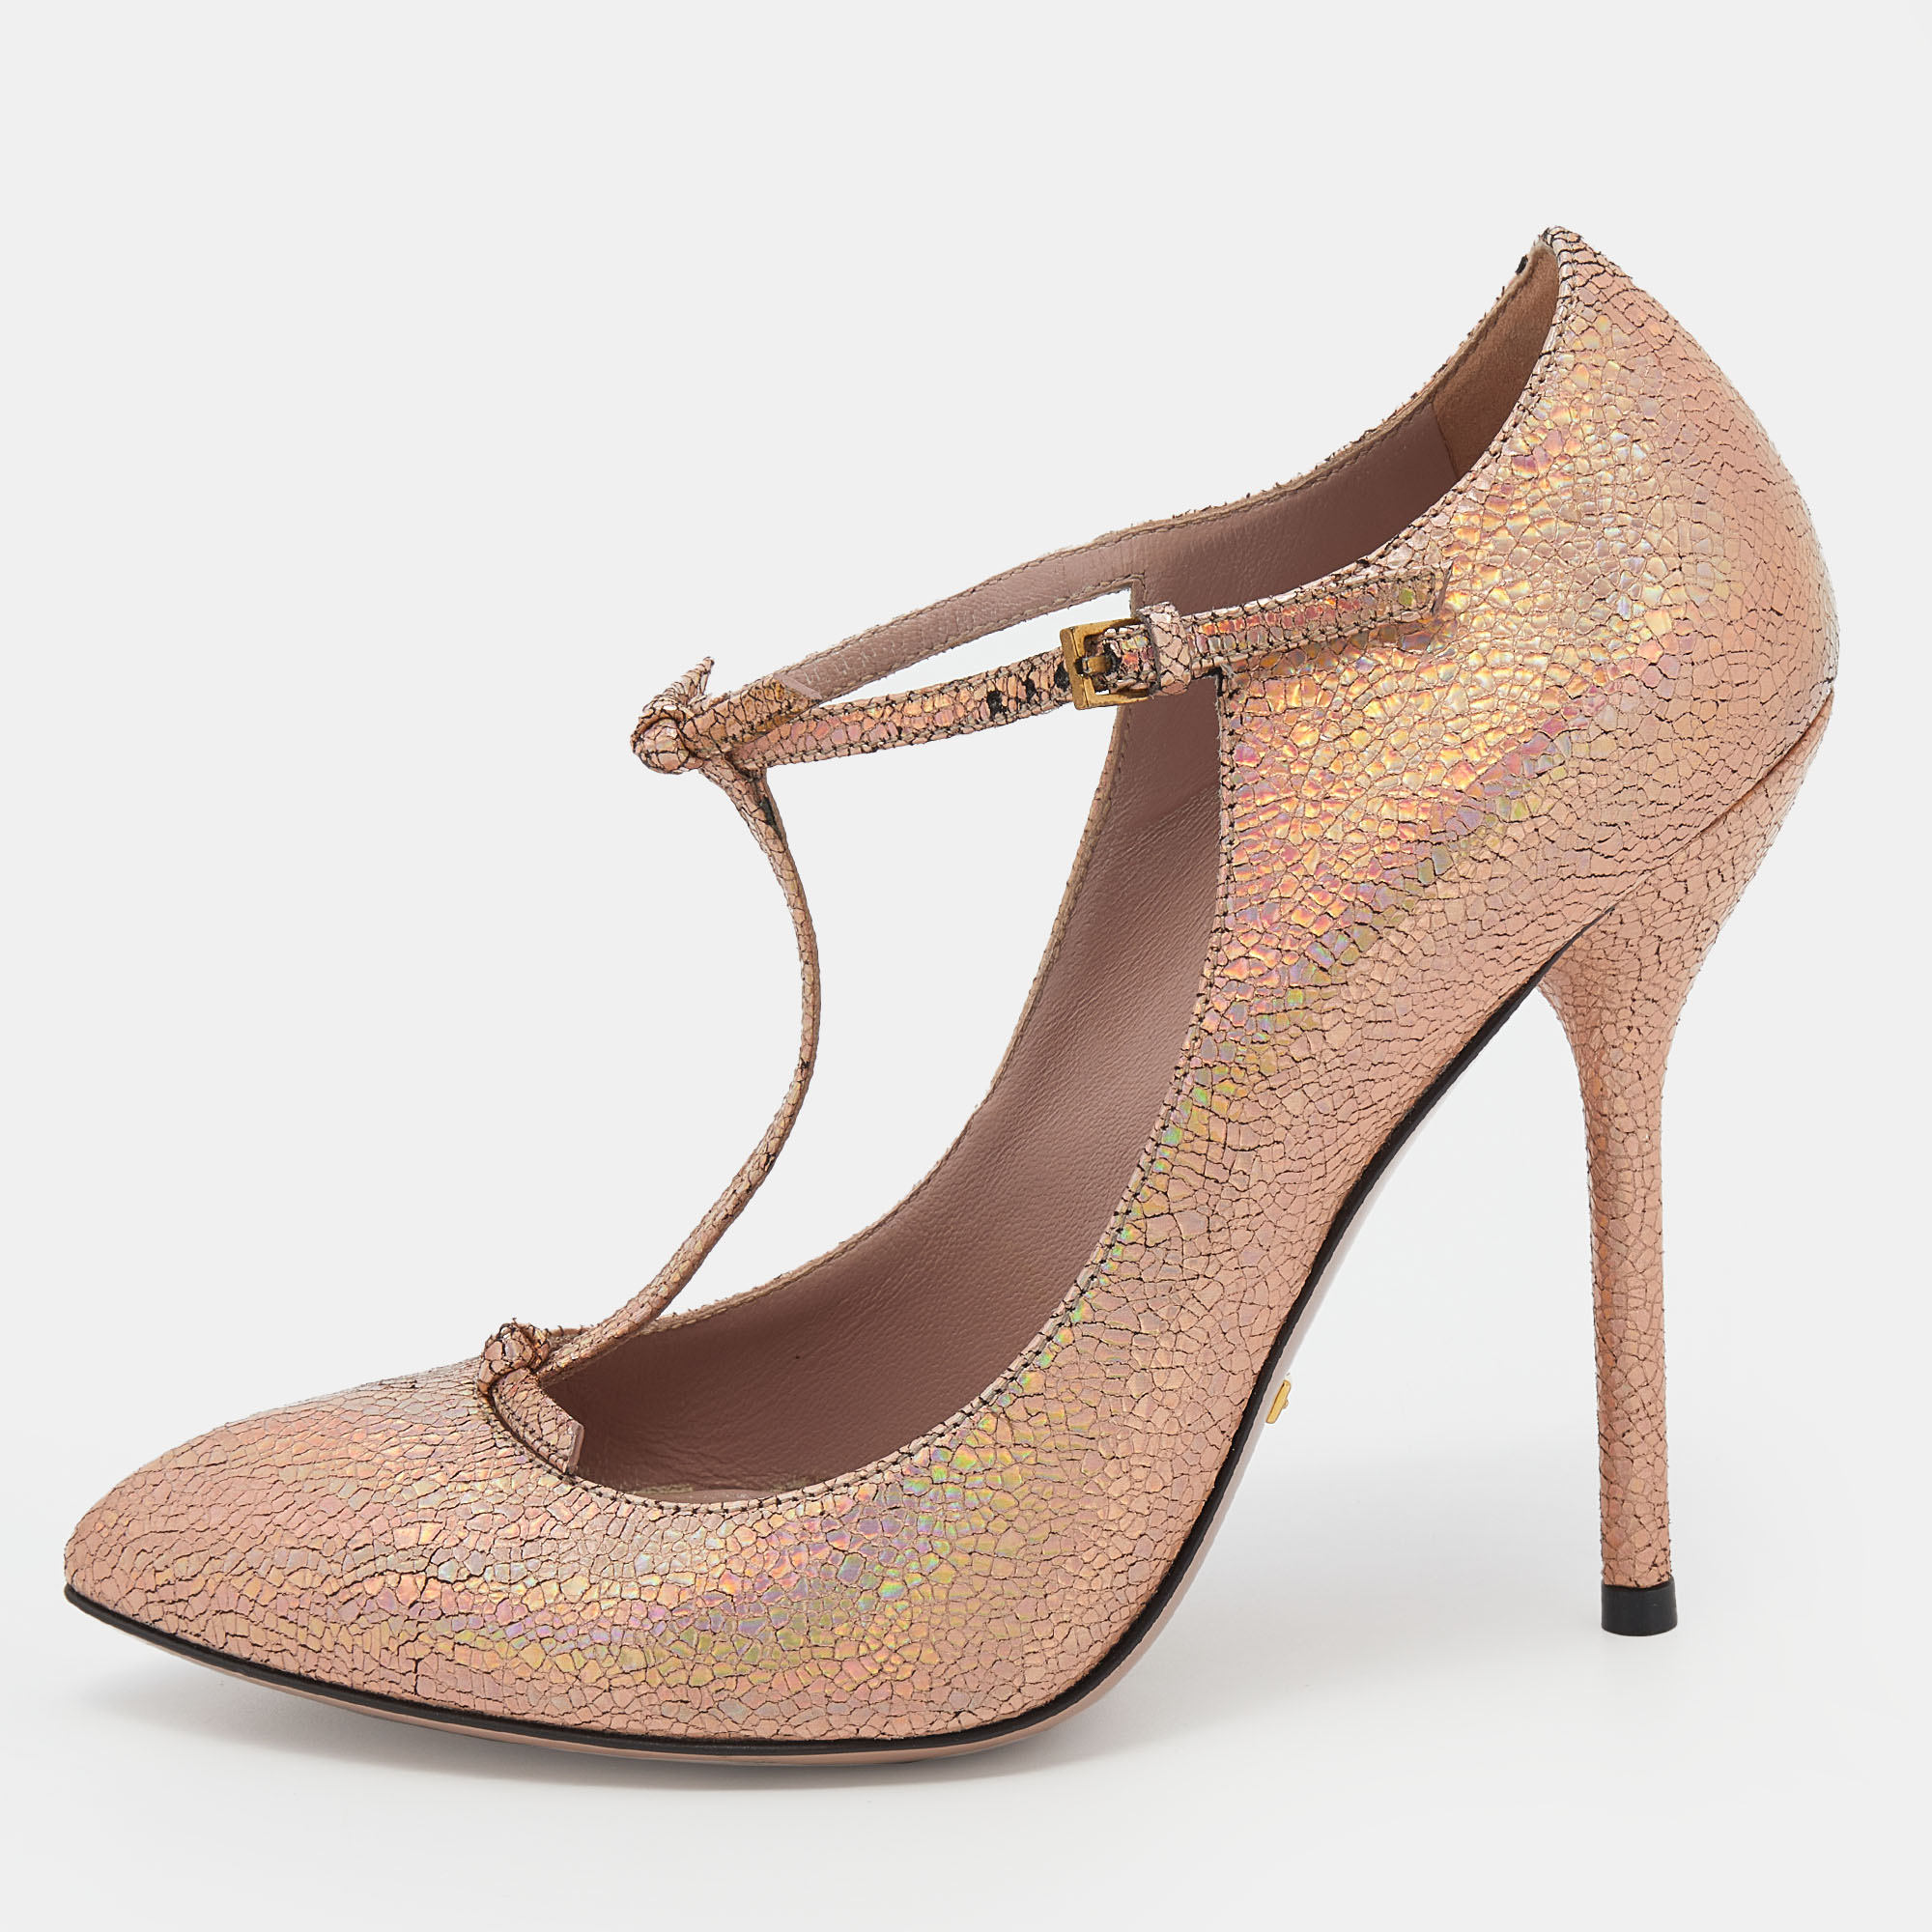 Gucci Metallic Holographic Crackled Leather Beverly T-Strap Pumps Size 37